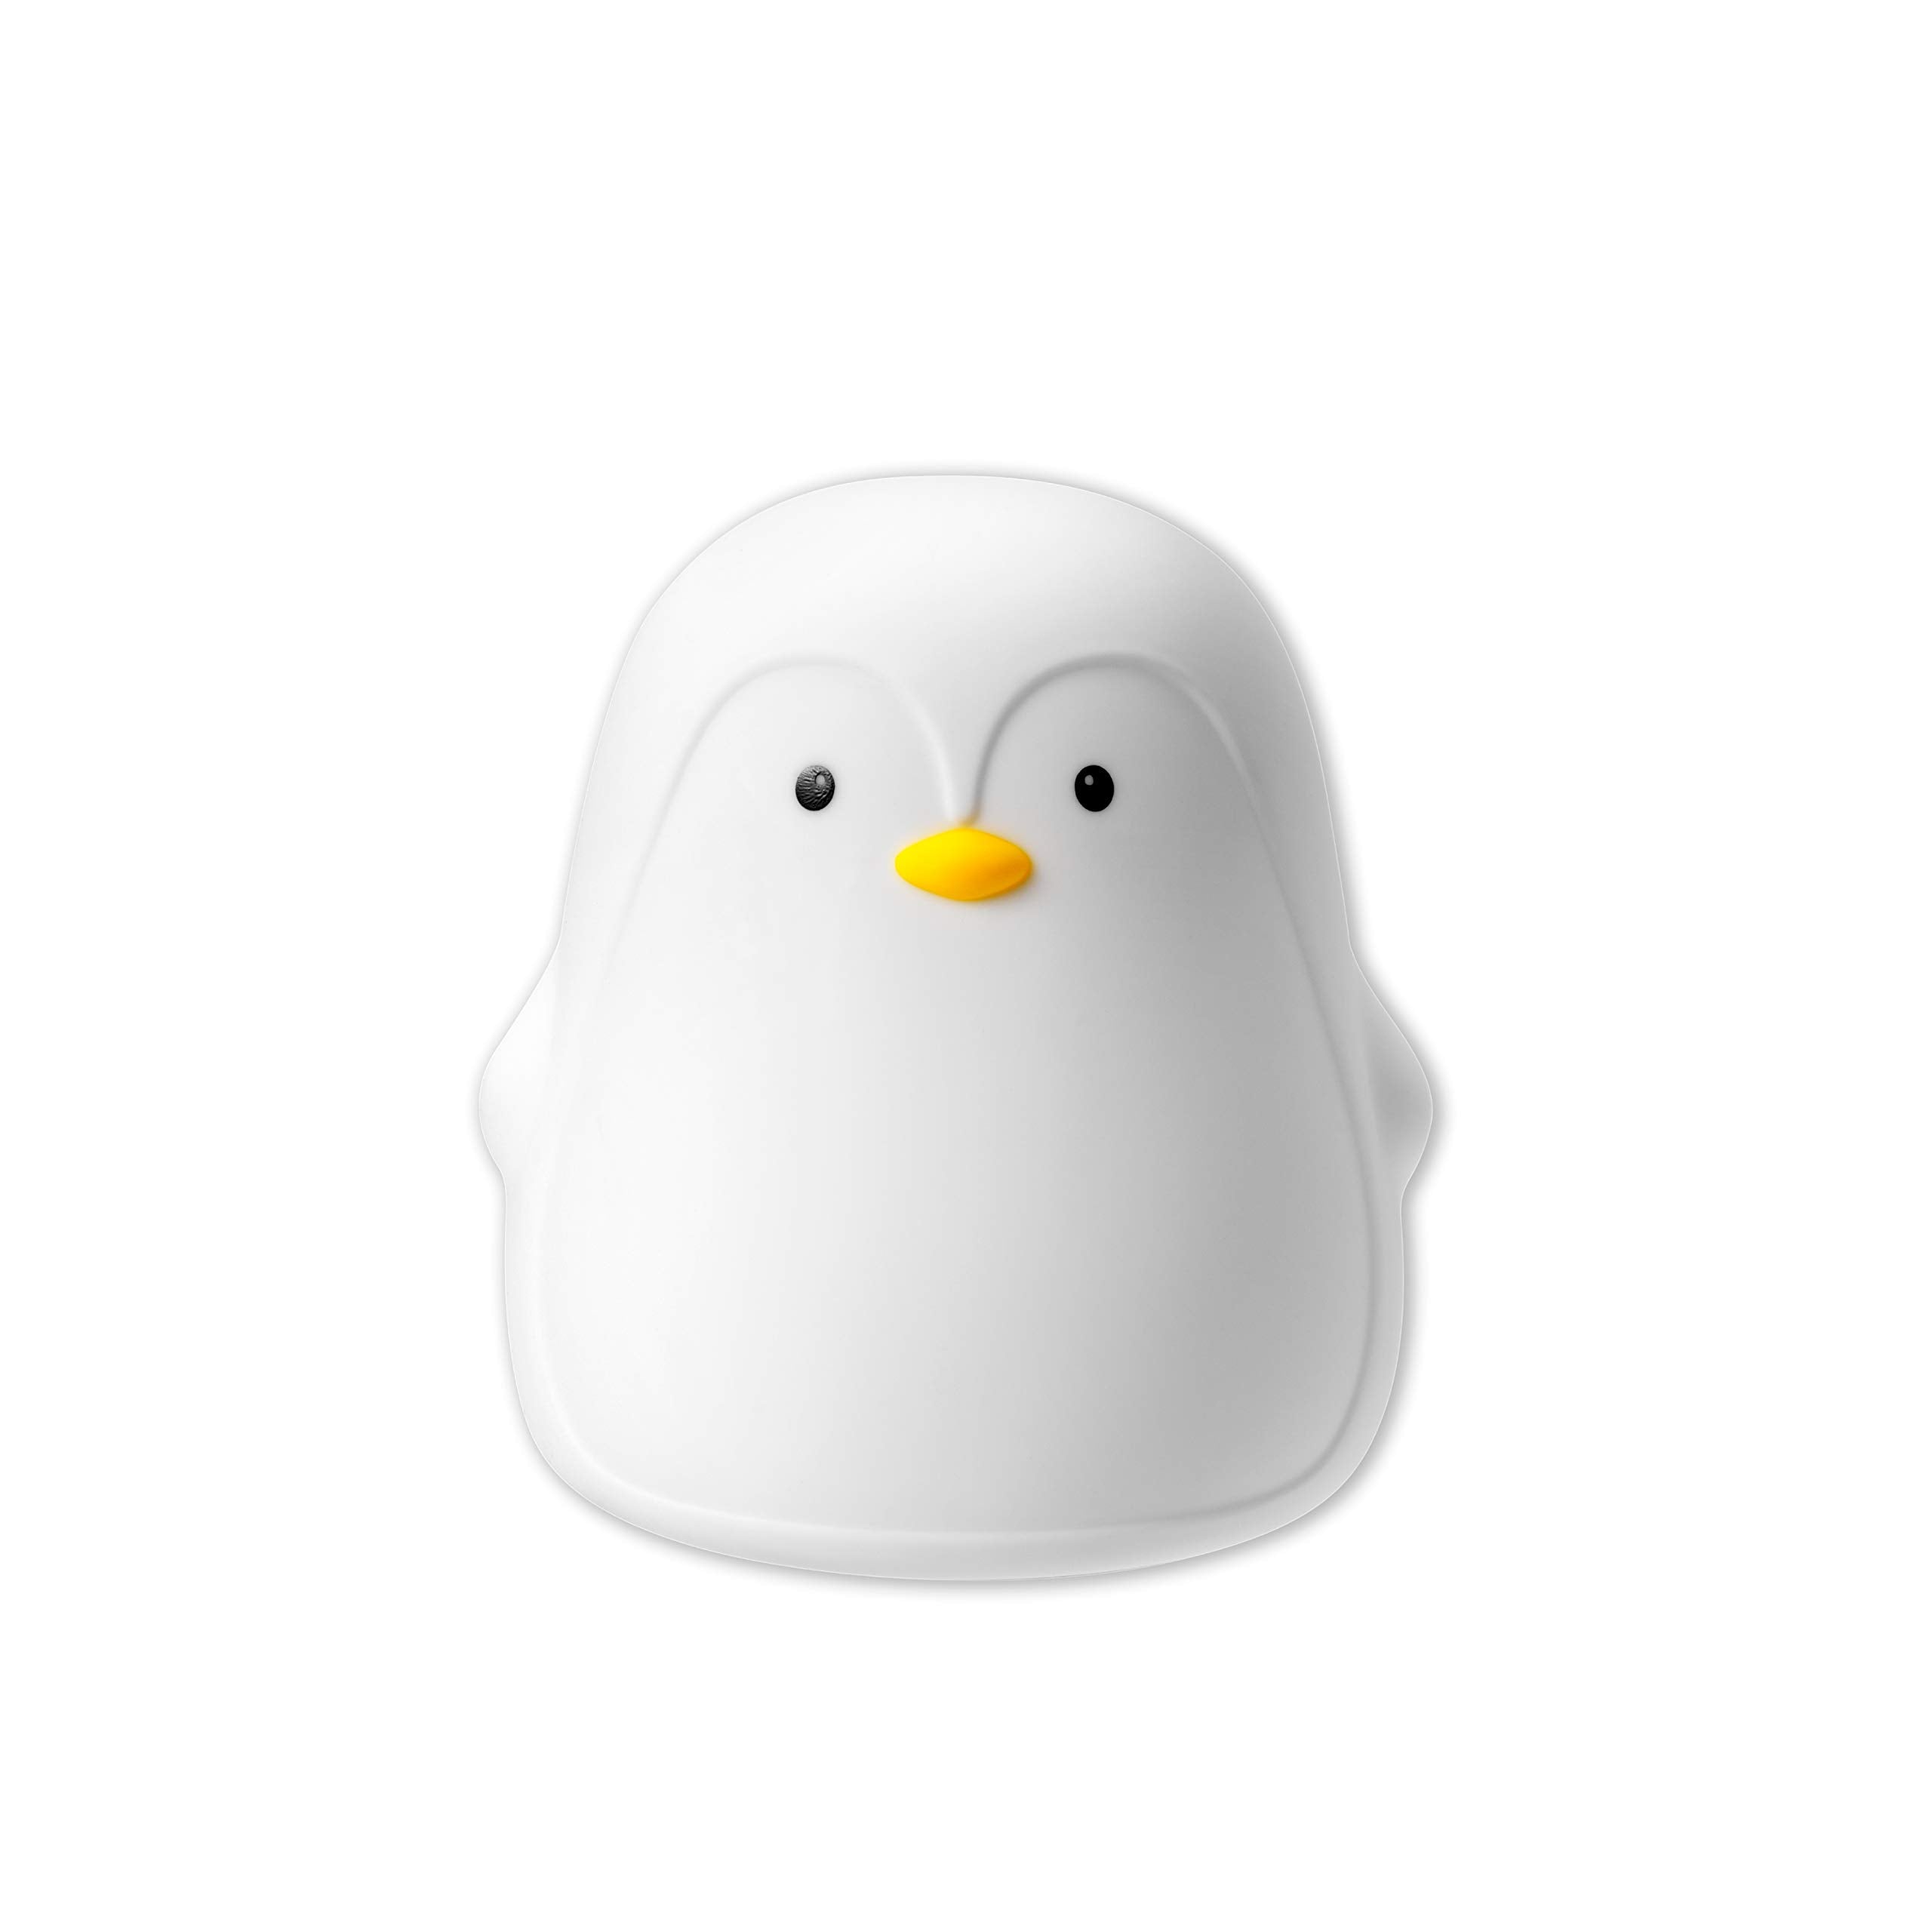 Nuby Penguin Baby Night Light, Rechargeable, Colour Changing Touch Night Light for Kids Bedside